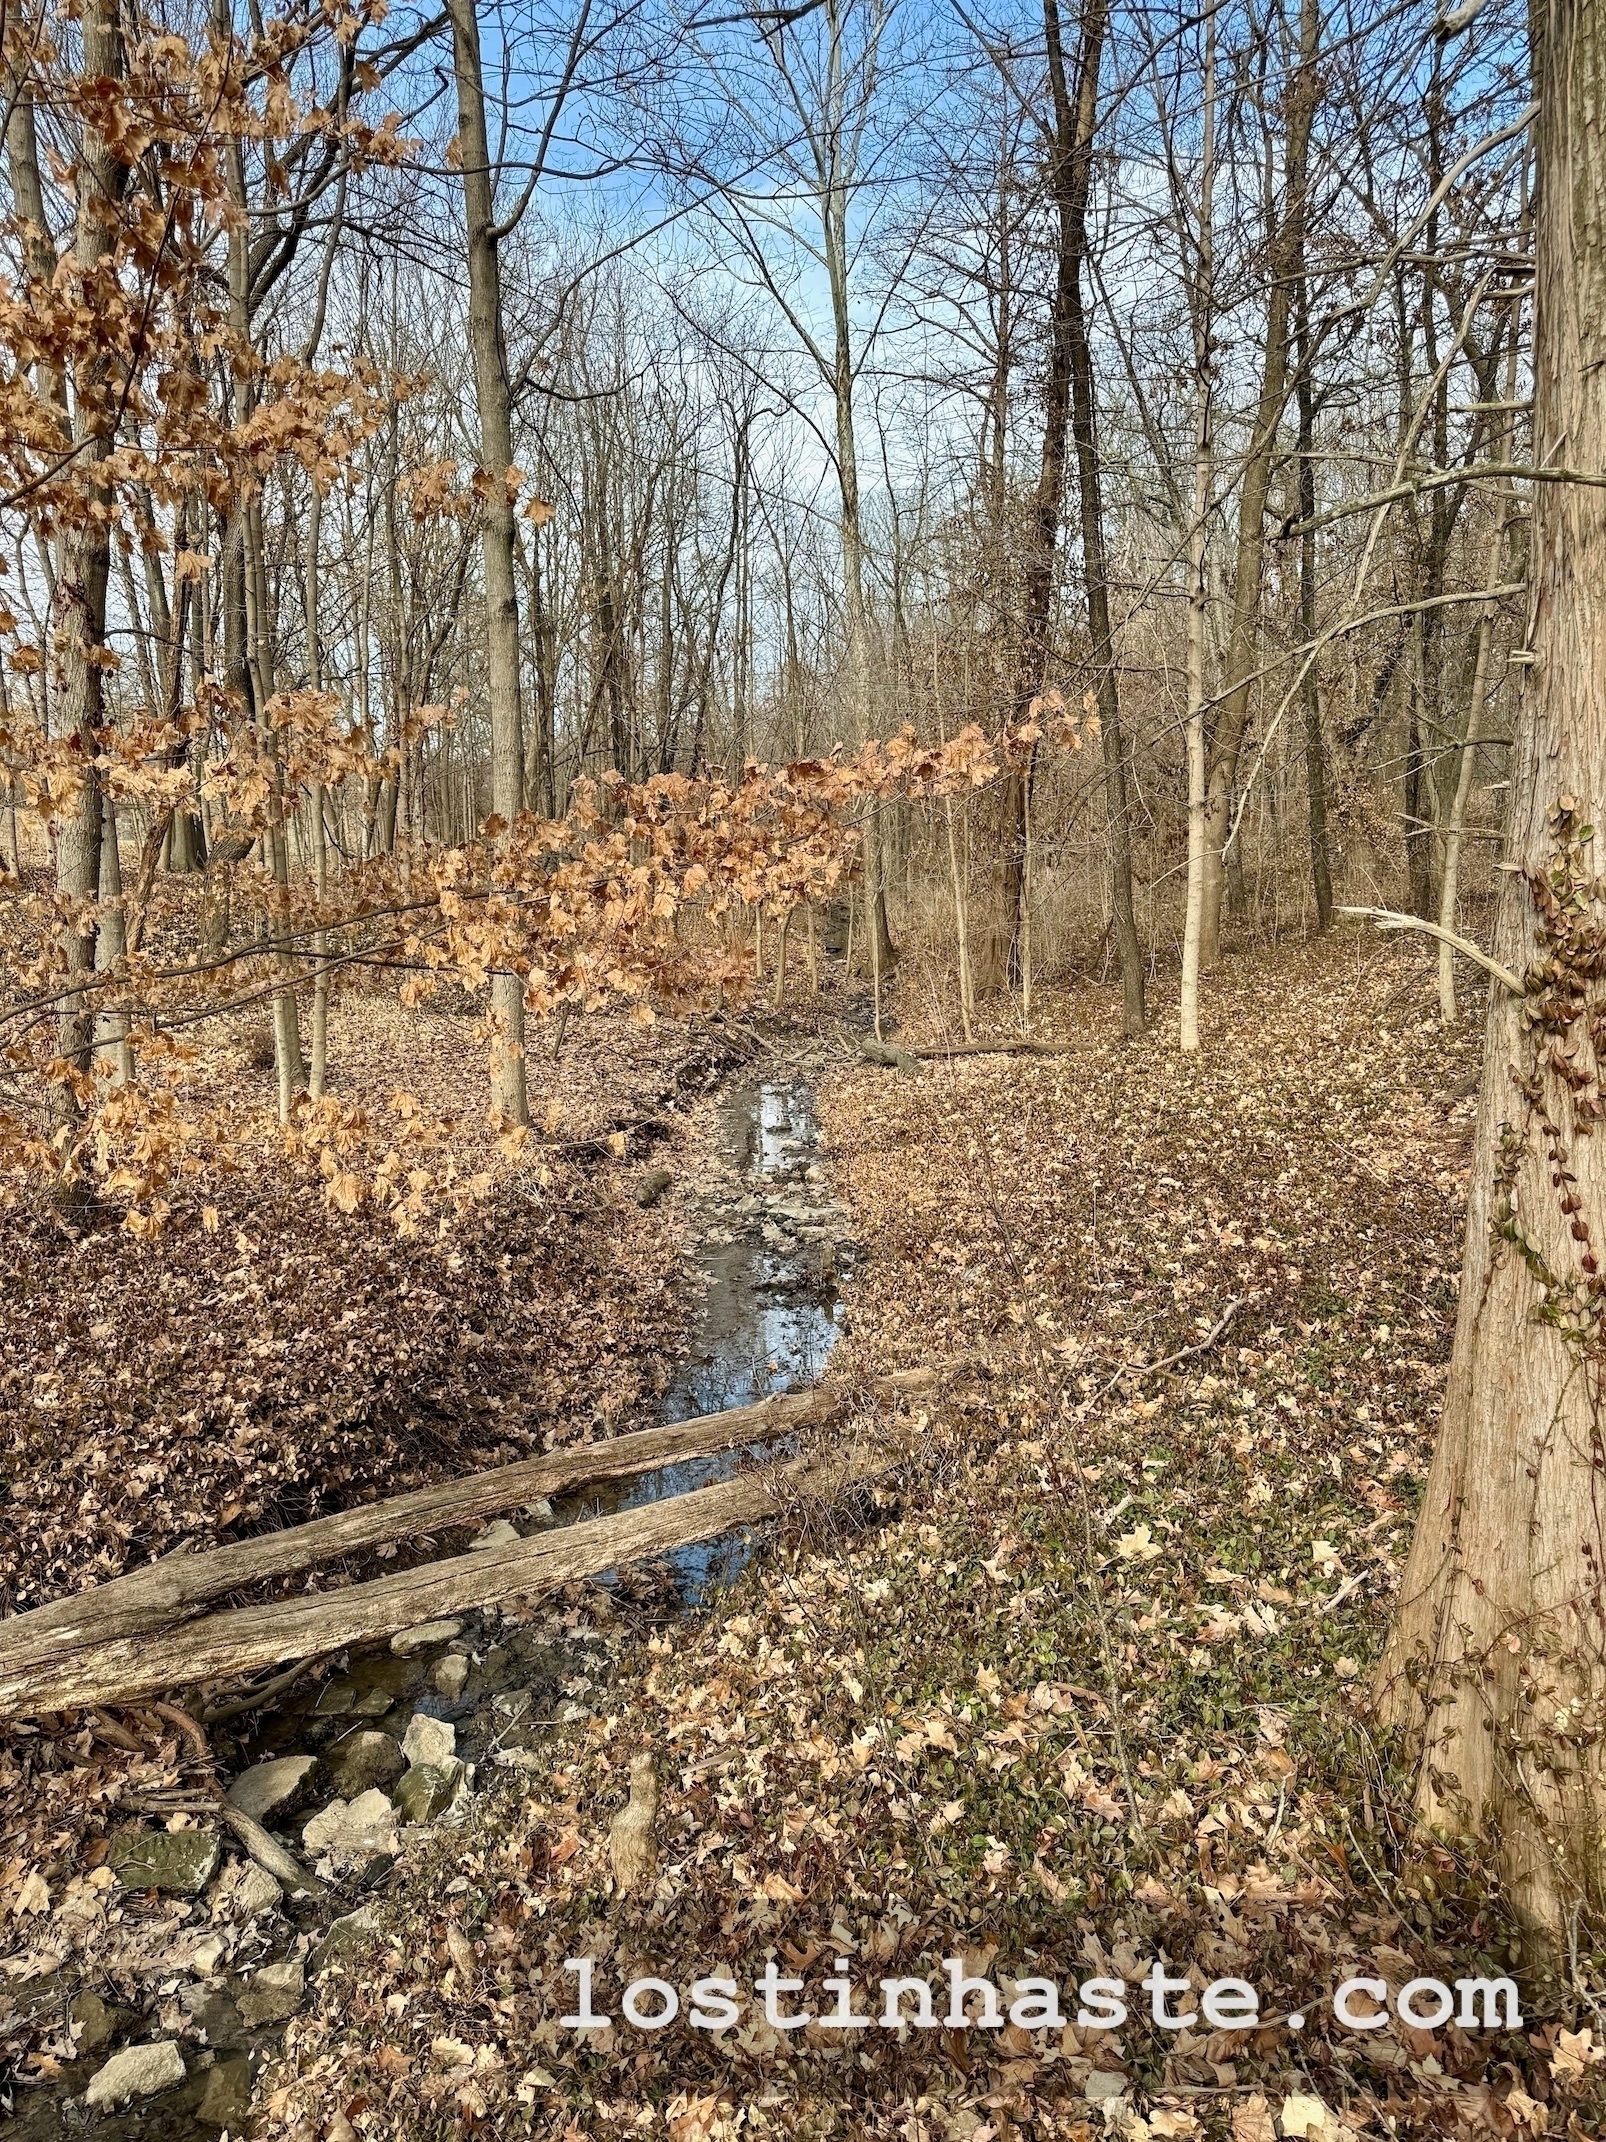 A narrow creek meanders through a leaf-strewn forest with bare trees.